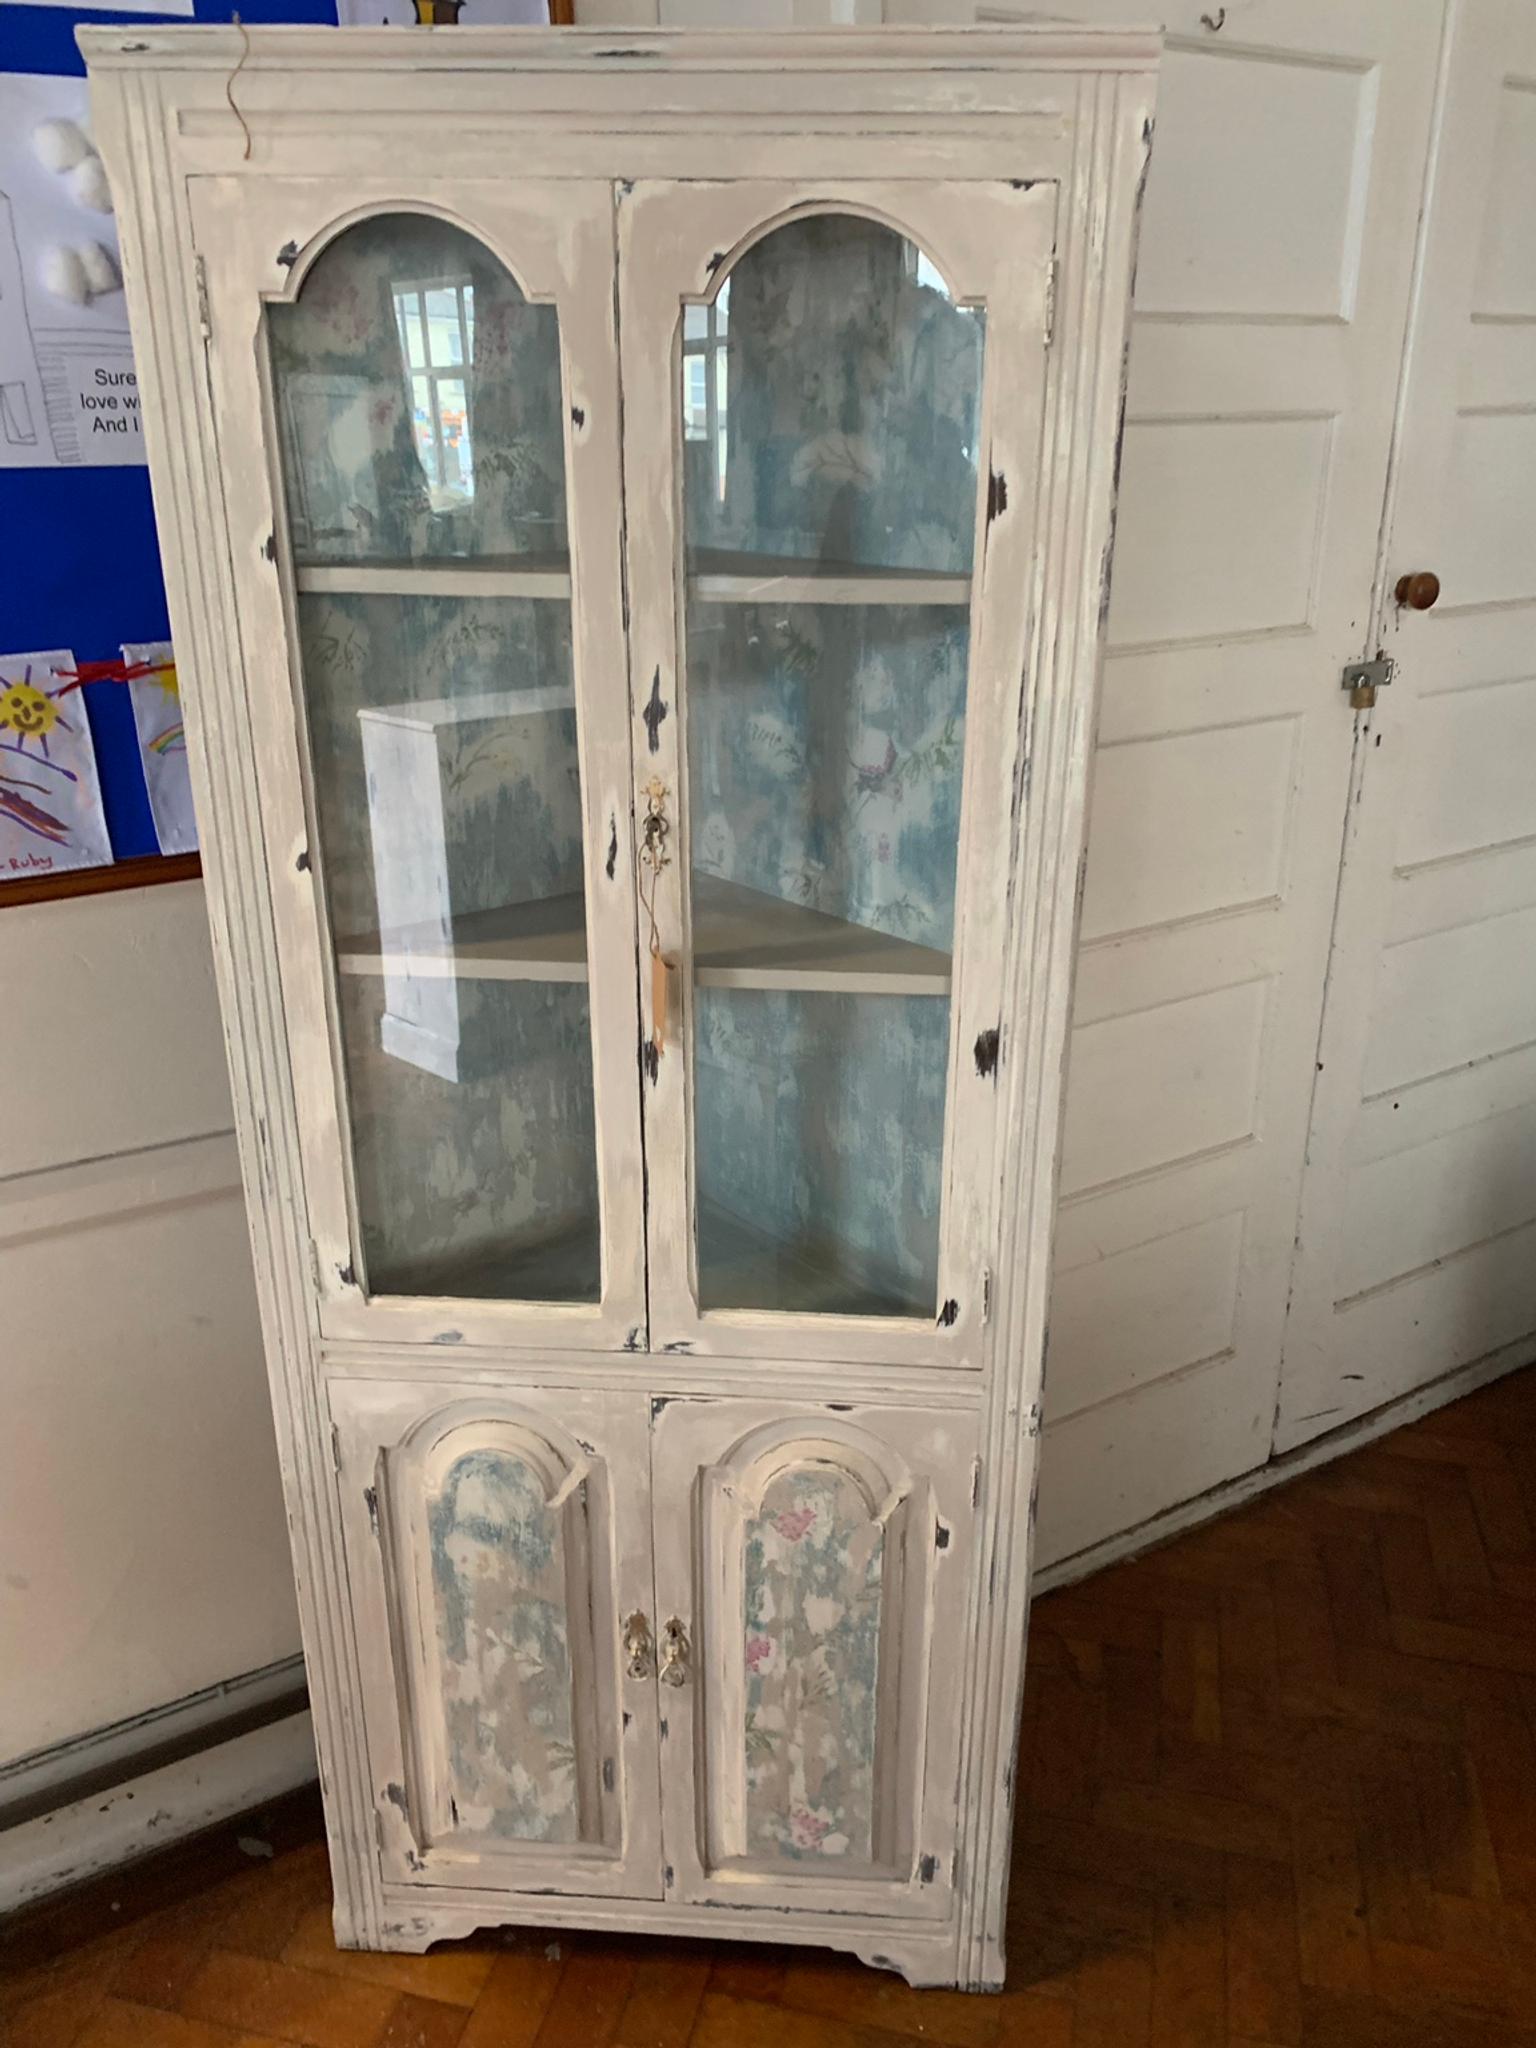 Shabby Chic Corner Unit In Cr0 London For 95 00 For Sale Shpock